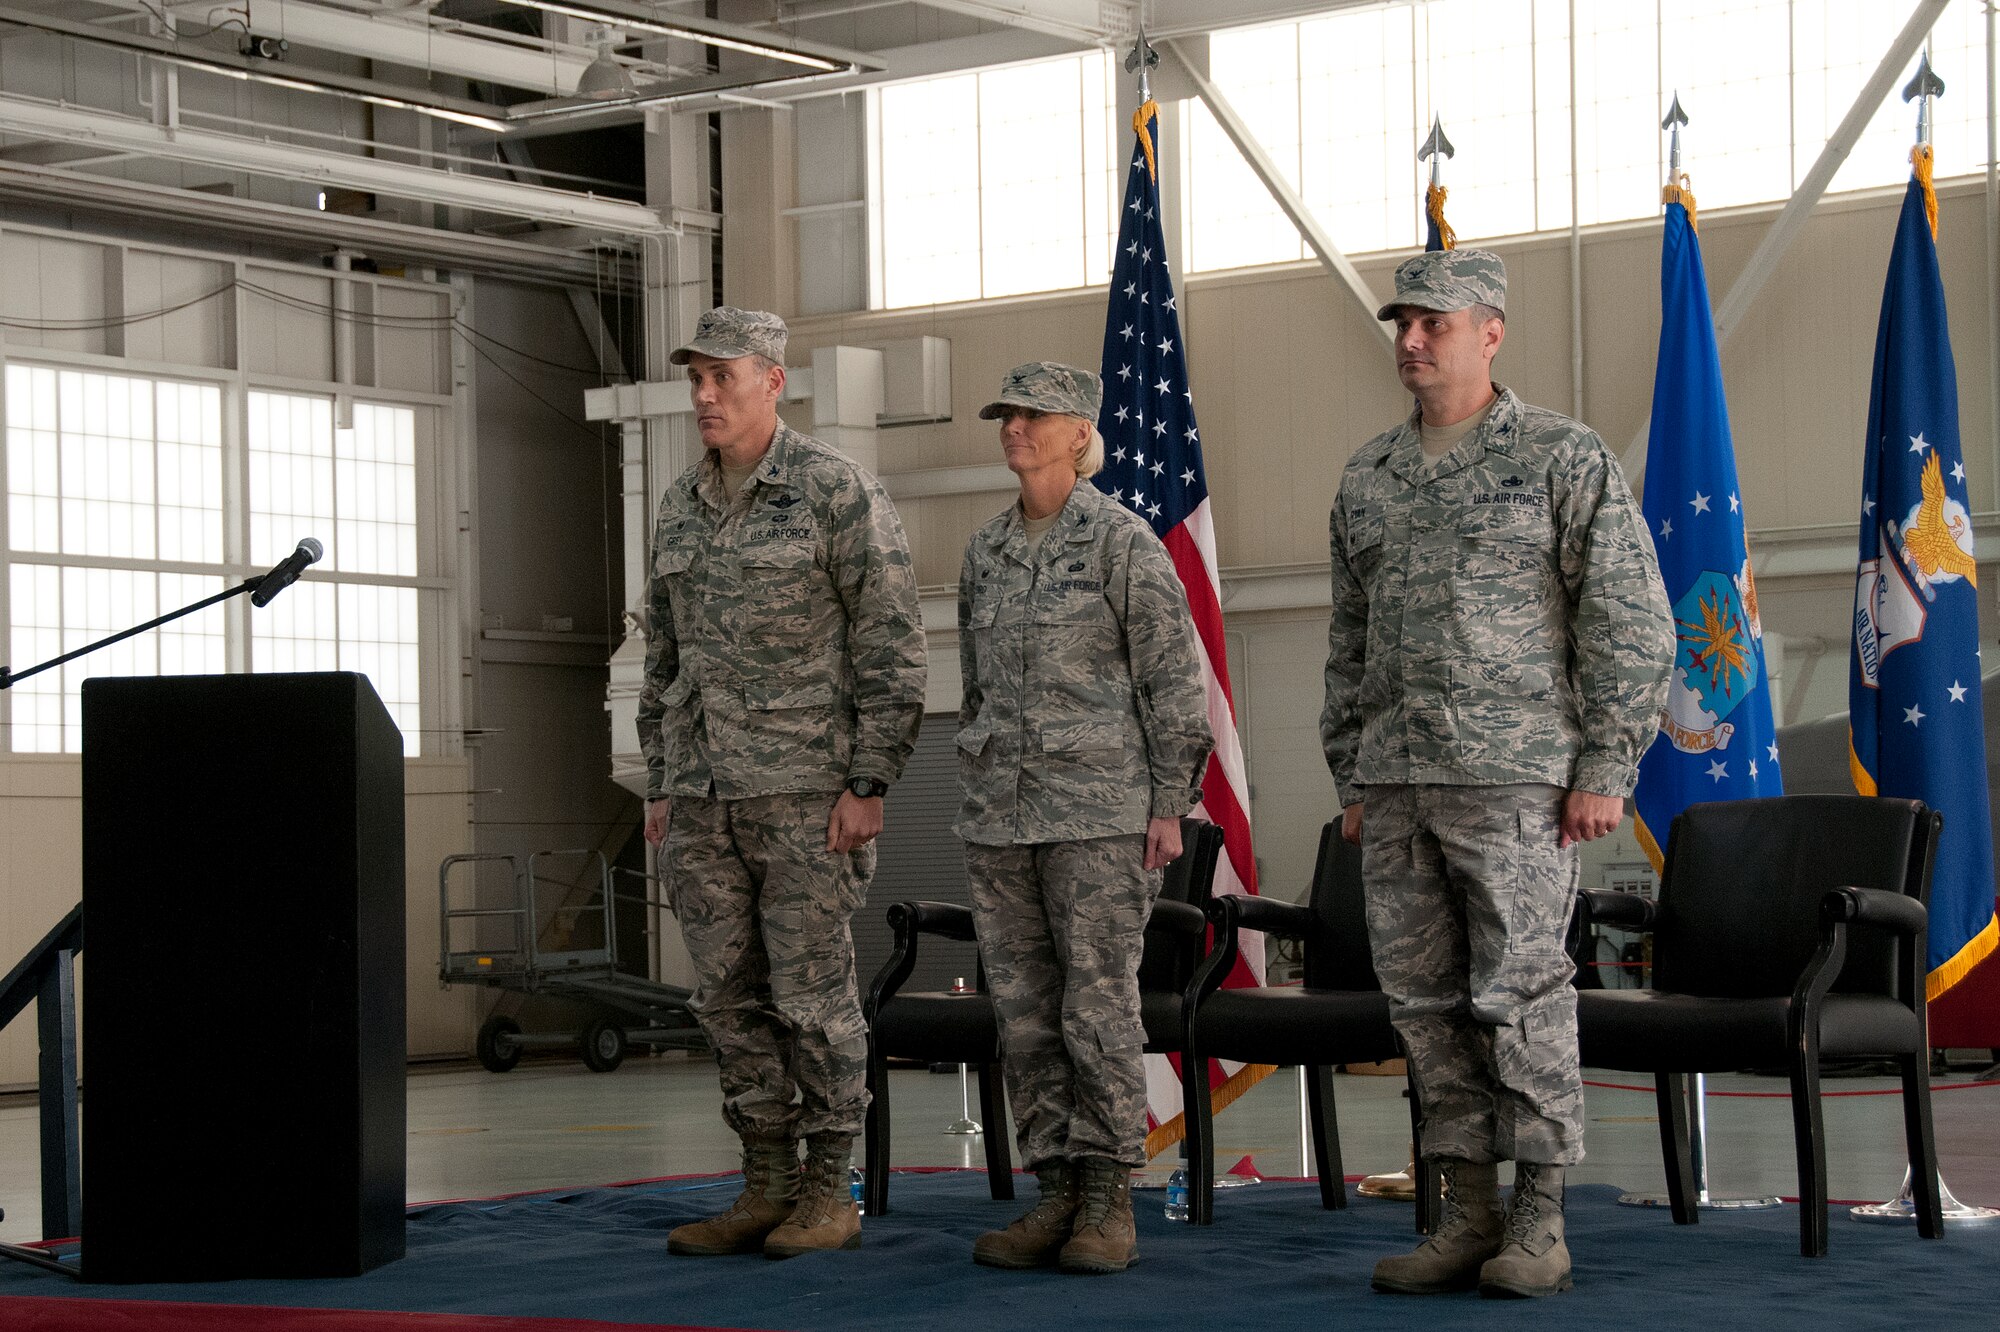 The 192nd Mission Support Group celebrated an assumption of command ceremony October 18, 2015, at Joint Base Langley-Eustis, Virginia. Col. Toni M. Lord assumed command of the Mission Support Group from Col. Jeffery L. Ryan. The 192nd MSG is comprised of four Squadrons with more than 340 personnel supporting an array of missions including security, personnel, communications, civil engineering, supply chain management, and logistics readiness. (U.S. Air National Guard photo by Master Sgt. Carlos J. Claudio)
